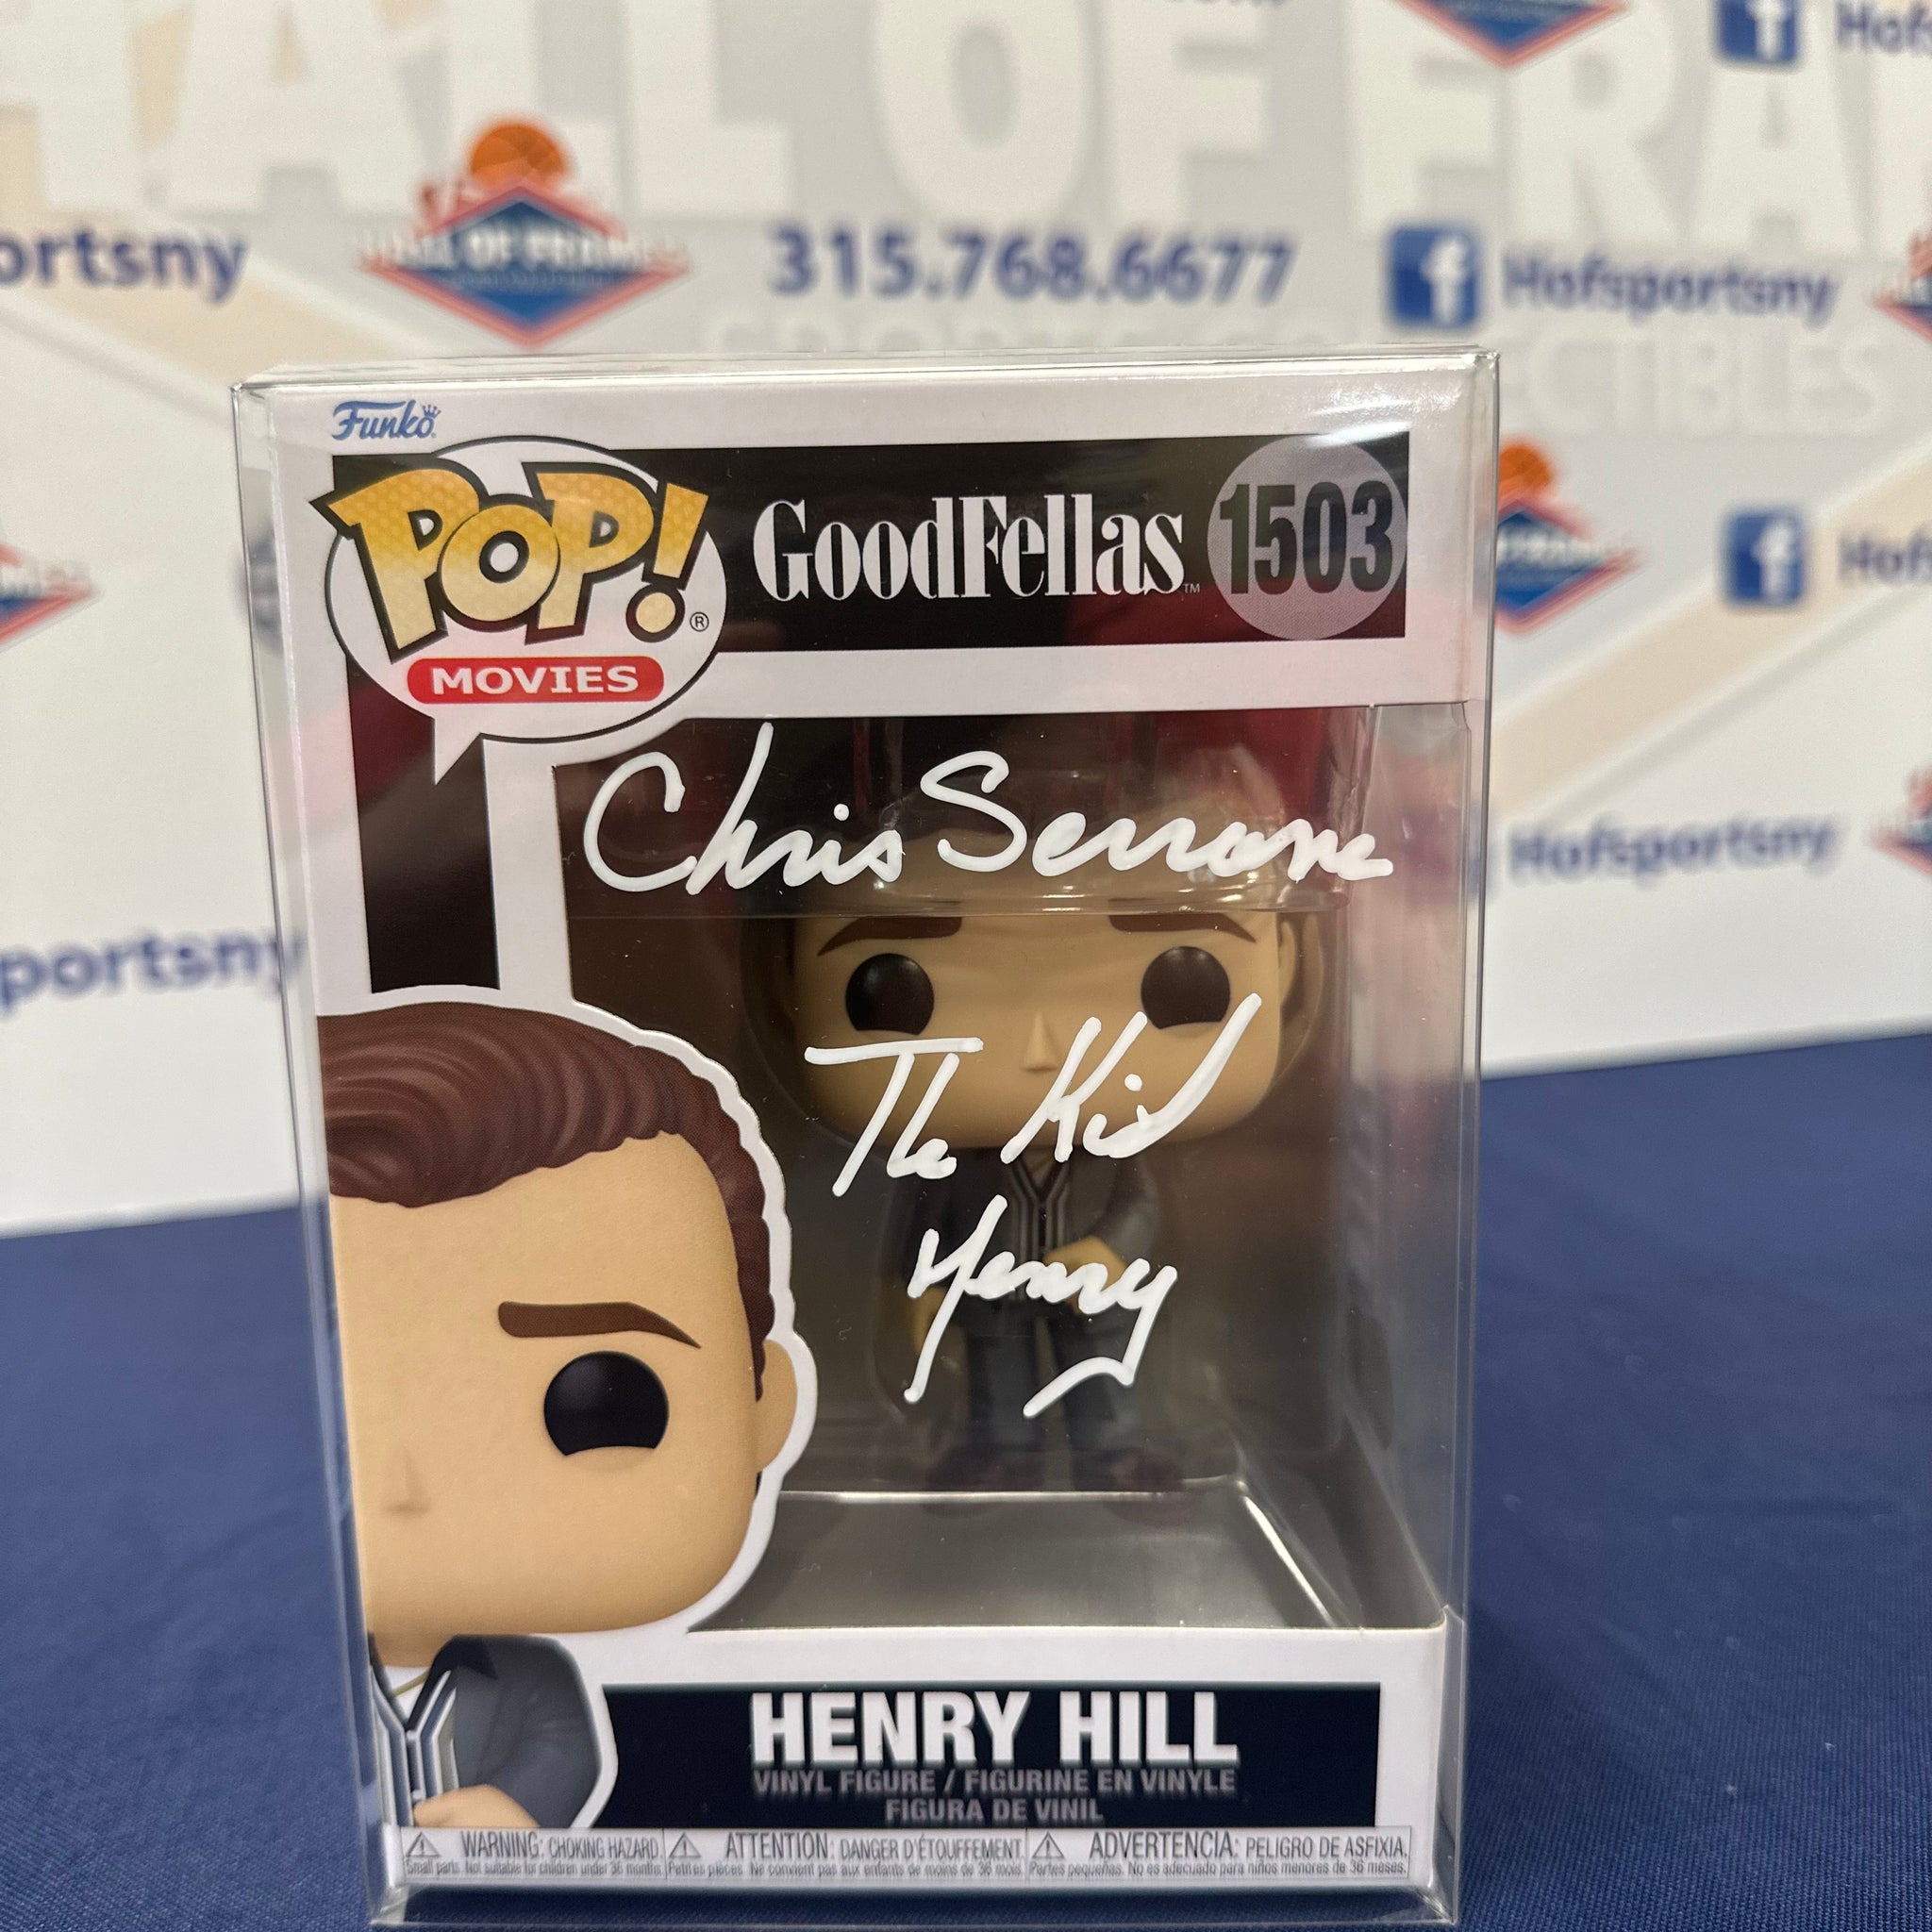 CHRIS SERRONE "HENRY HILL" GOODFELLAS SIGNED FUNKO POP! INSCR. THE KID HENRY / NEVER RAT ON YOUR FRIENDS! BAS AUTHENTIC!